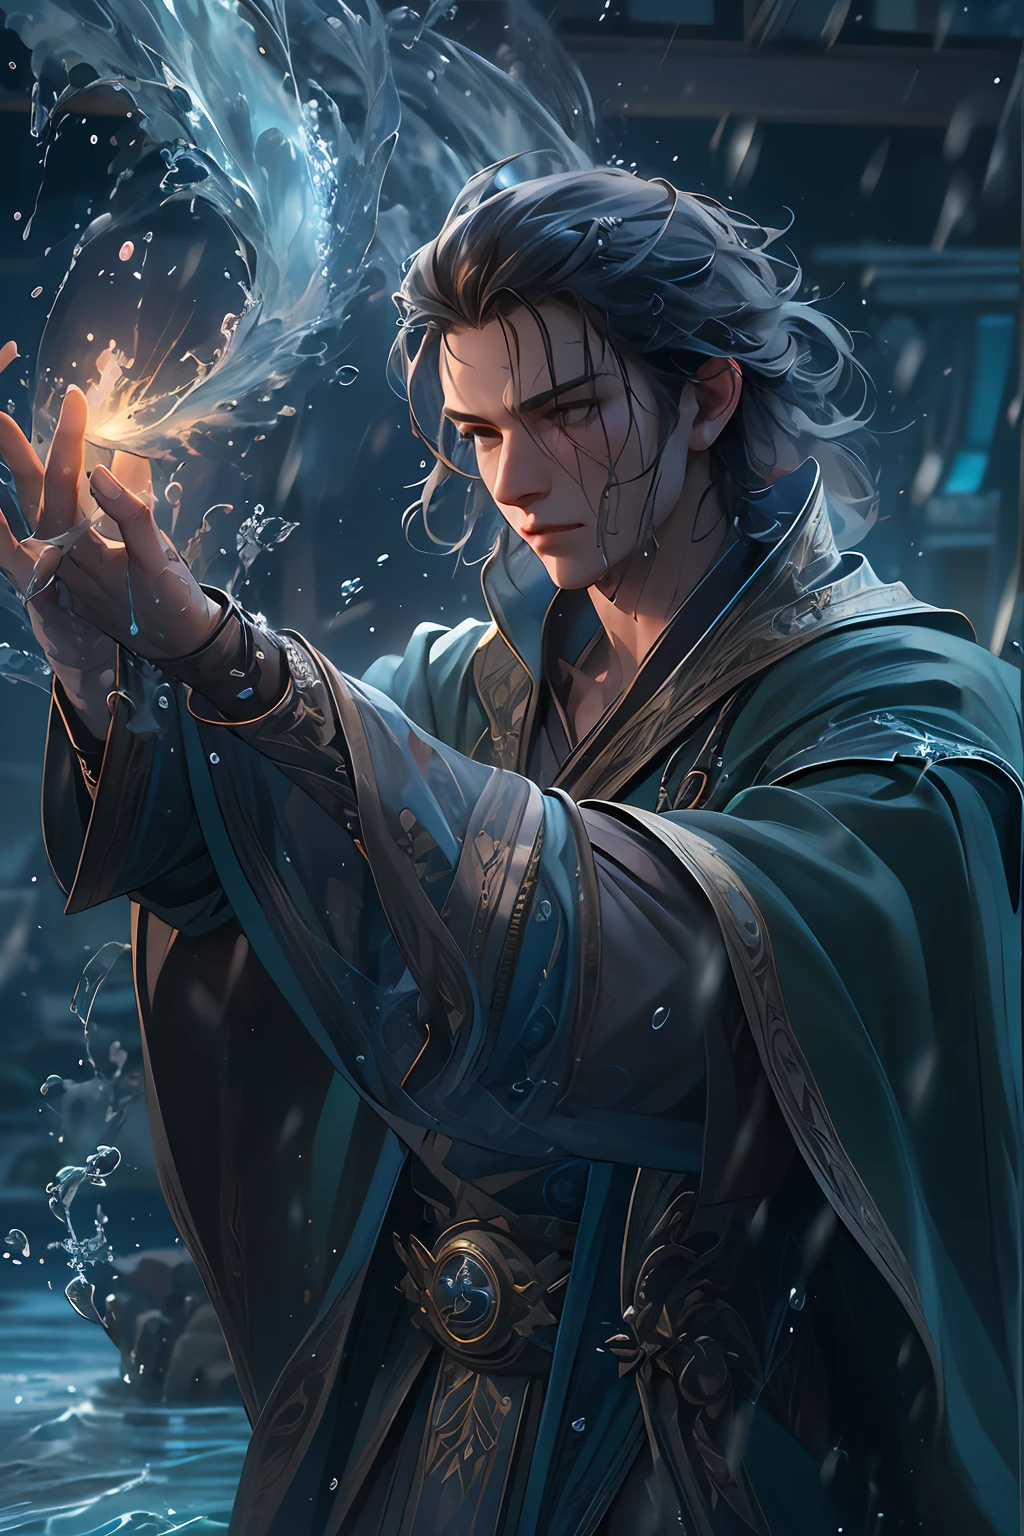 A ((male)) wizard (controls) water, water ((magic)), casting spell, water jets, dynamic pose, award-winning photography, complex, detailed, stunning, hair texture, wet hair (wet hair), hanging), model style ( highly detailed CG wallpaper Unity 8k), handsome, smooth skin